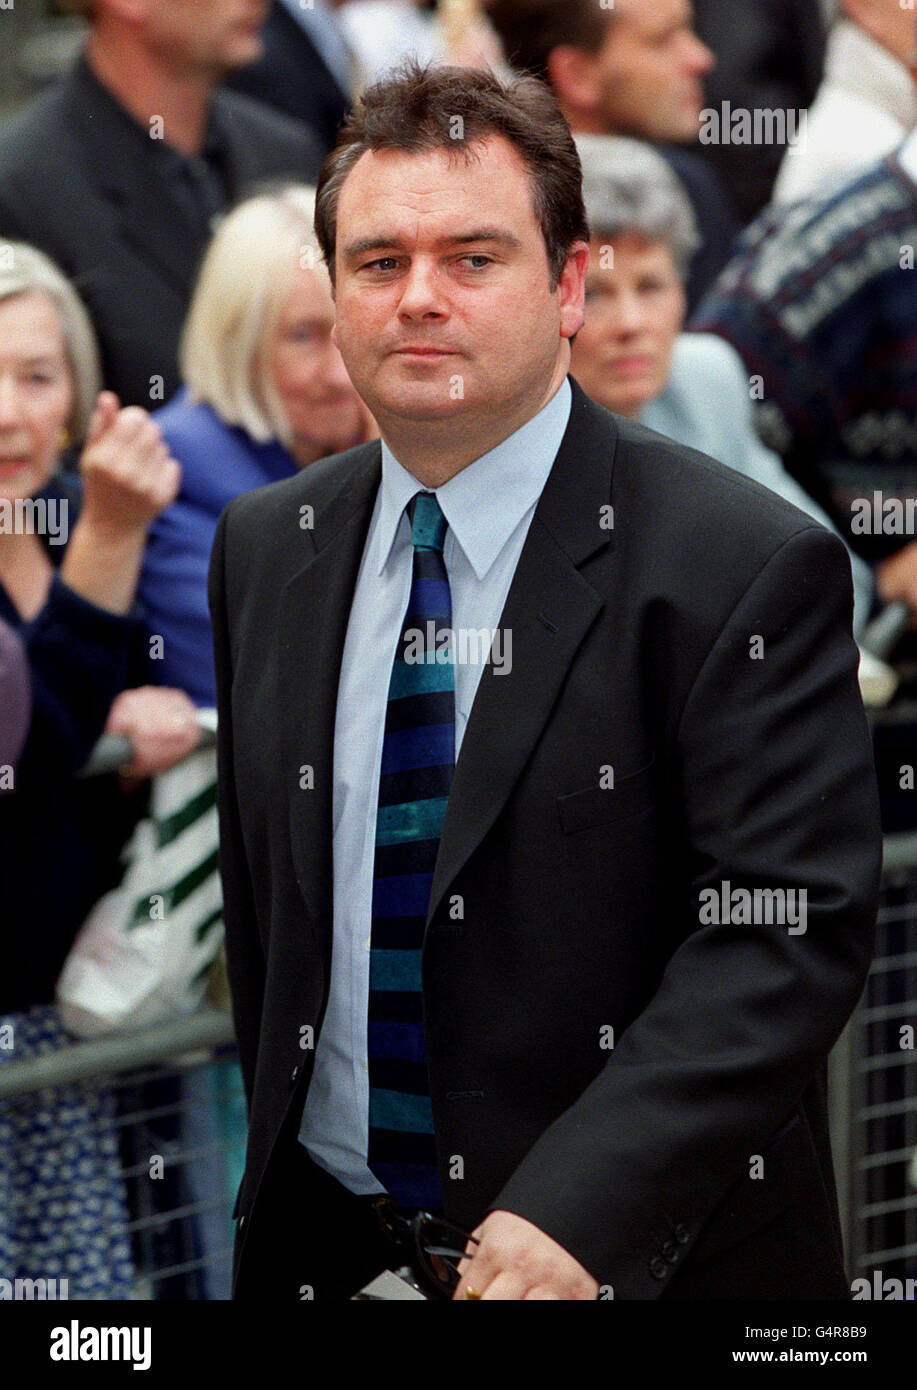 GMTV presenter, Eamonn Holmes, attending the Jill Dando memorial service being held at the All Souls Church in London, for a service in tribute to the star who was murdered outside her home. * The London service - taking place just three days after she was due to marry fiance Alan Farthing - was designed as a positive celebration of her life. Stock Photo